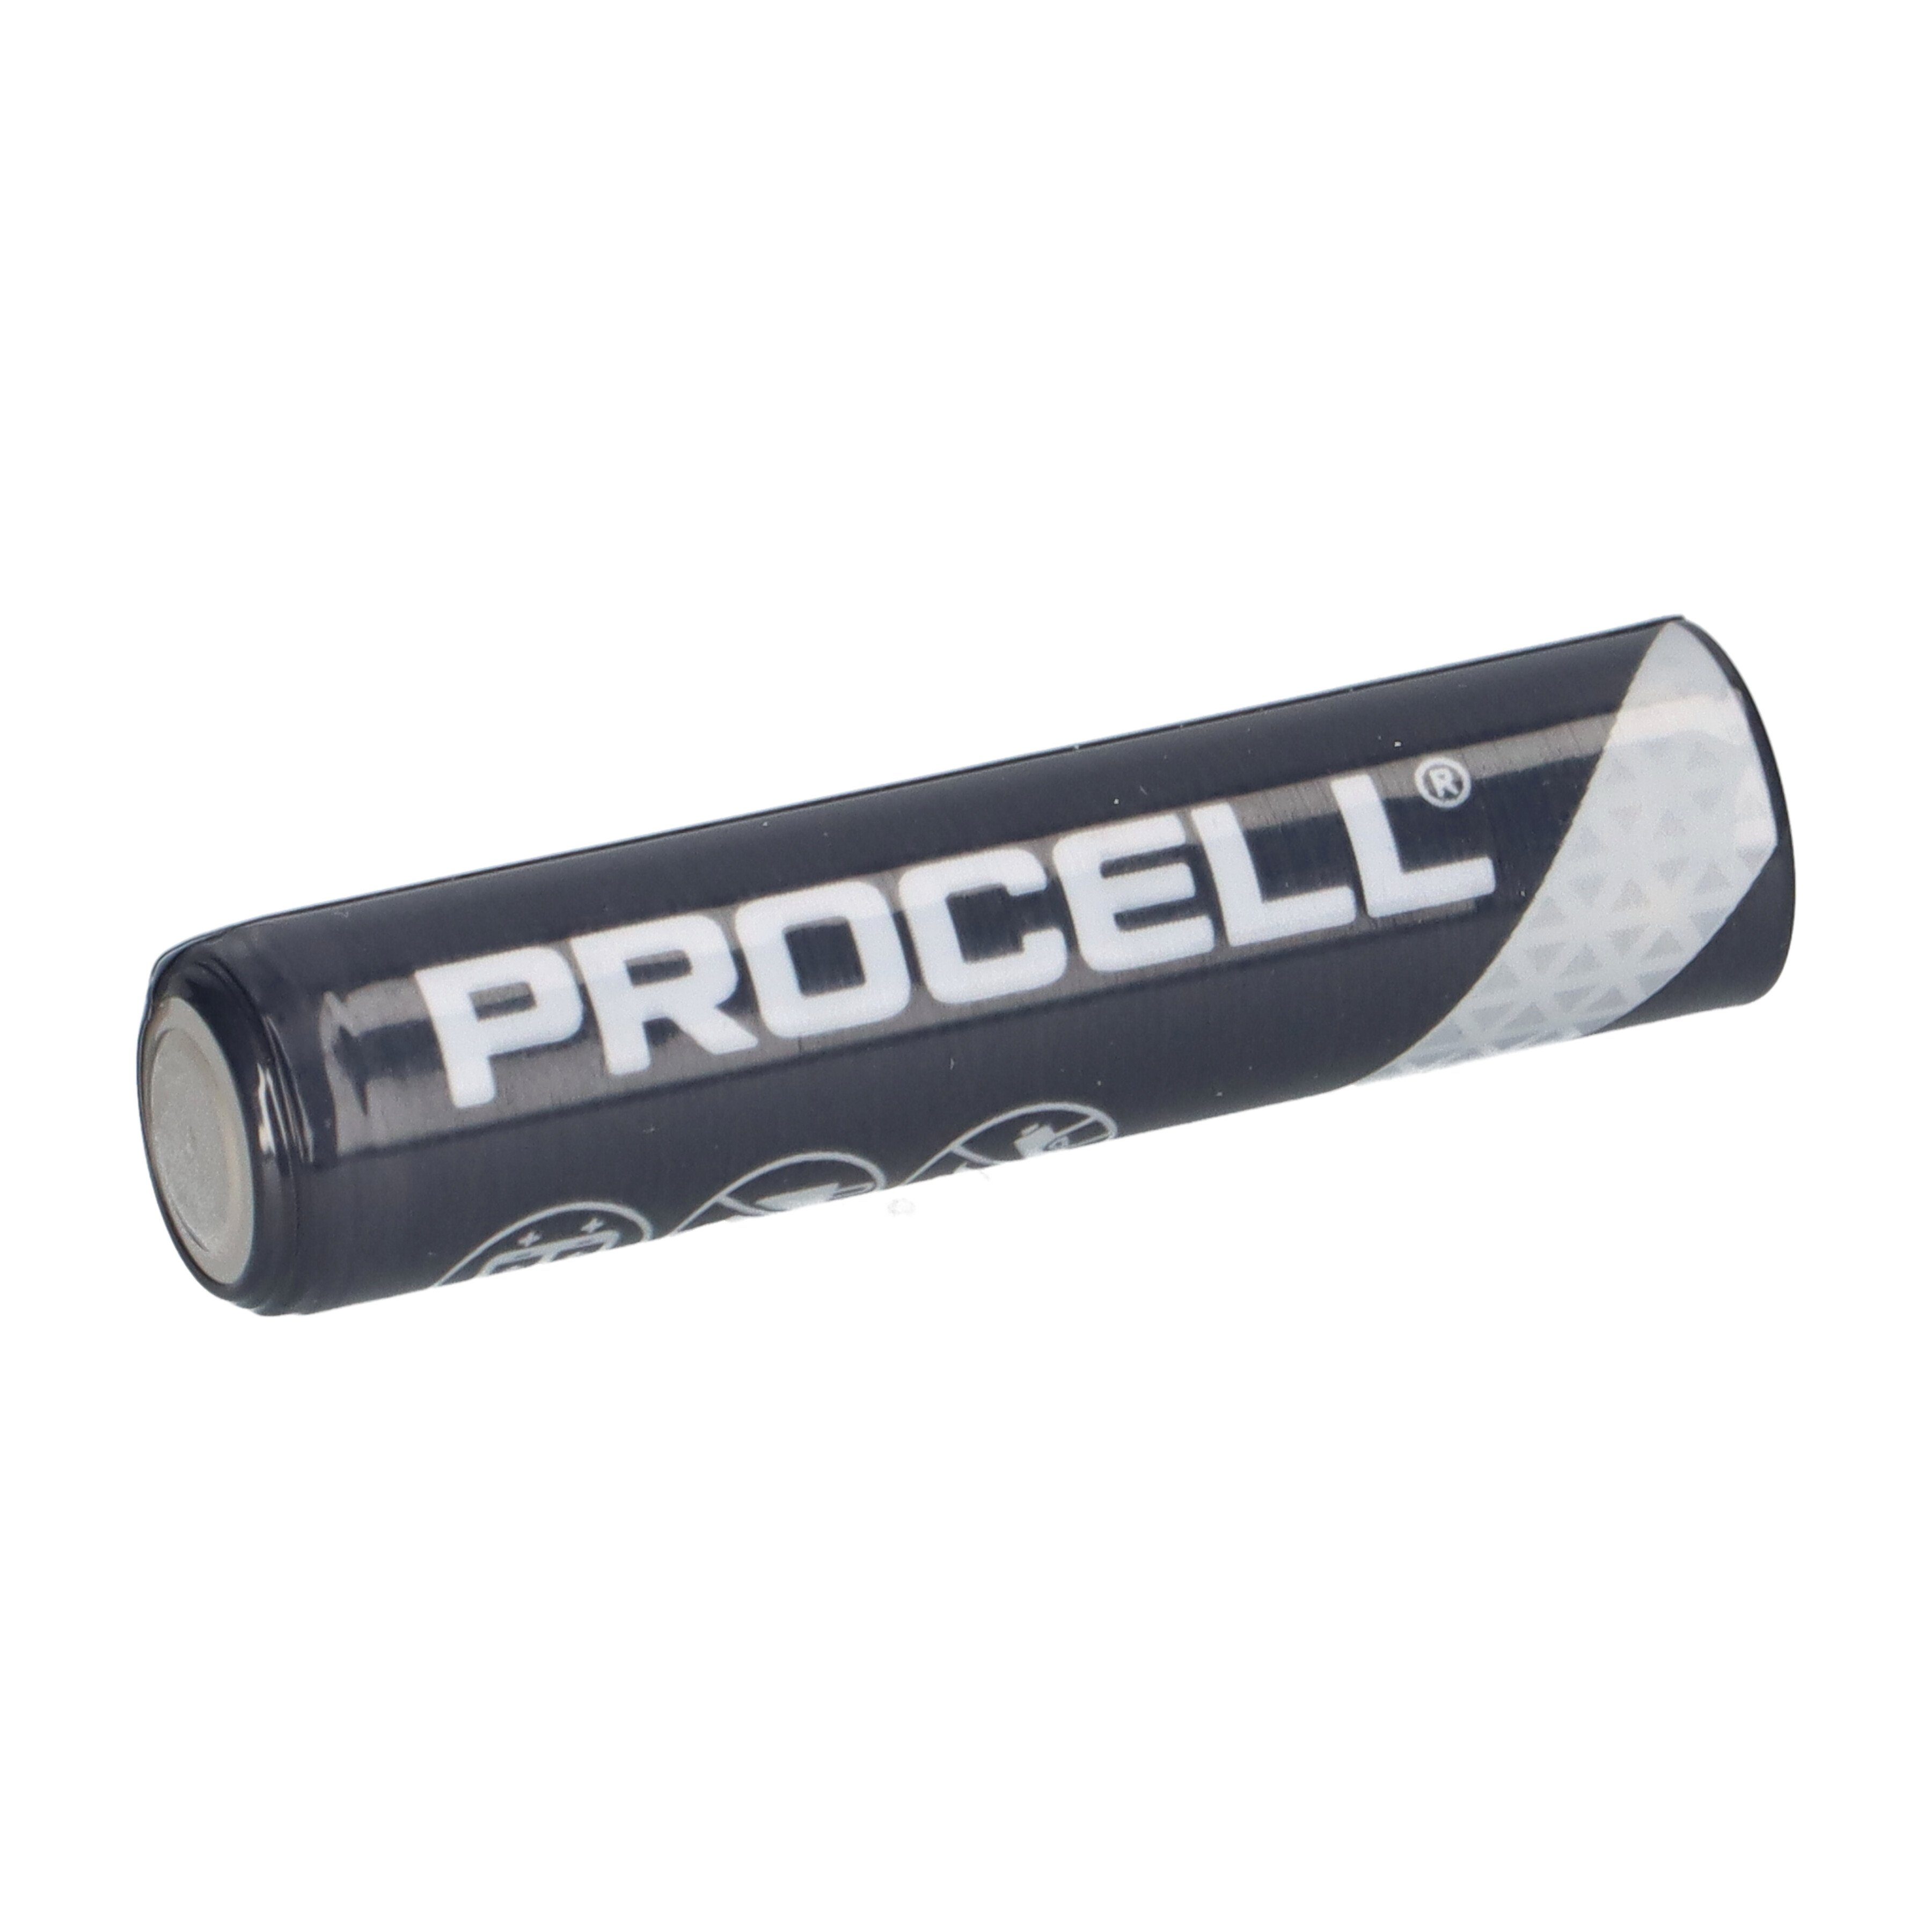 Batterie Duracell MN2400 Micro AAA Procell 10x Batterie Duracell